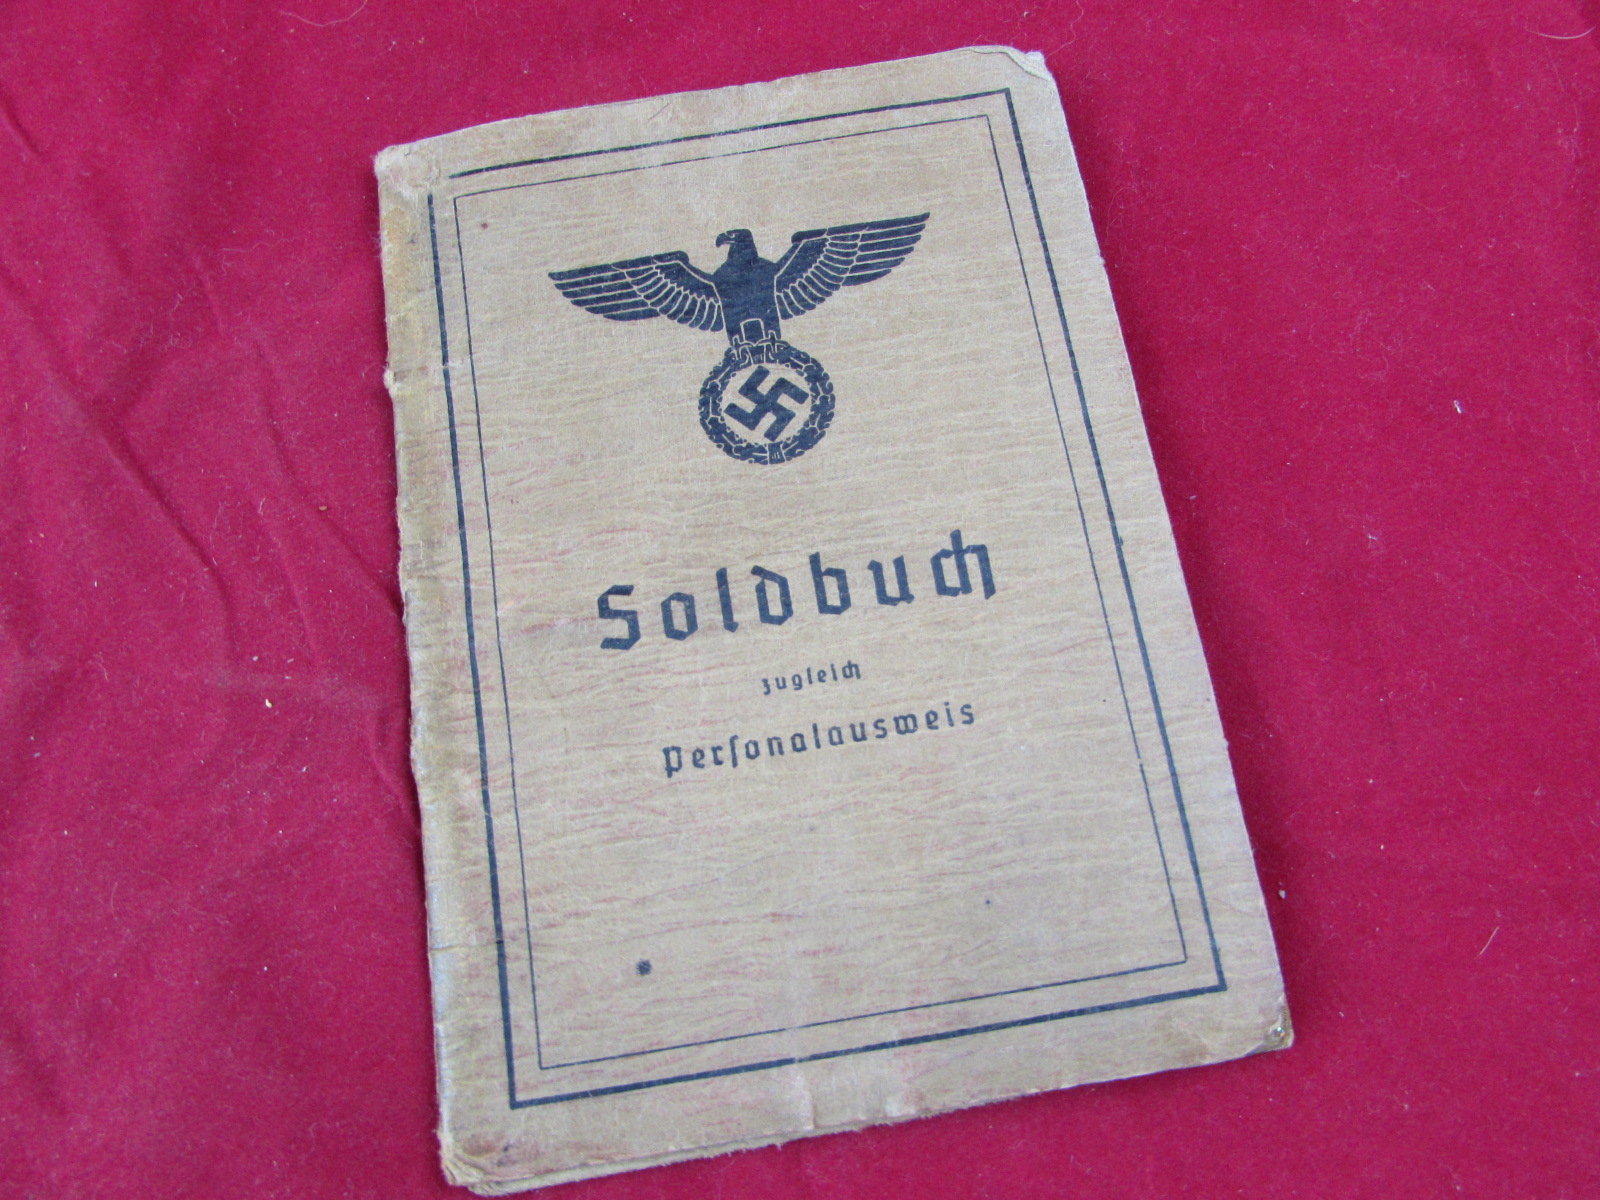 Afrikakorps Soldbuch and POW Documents